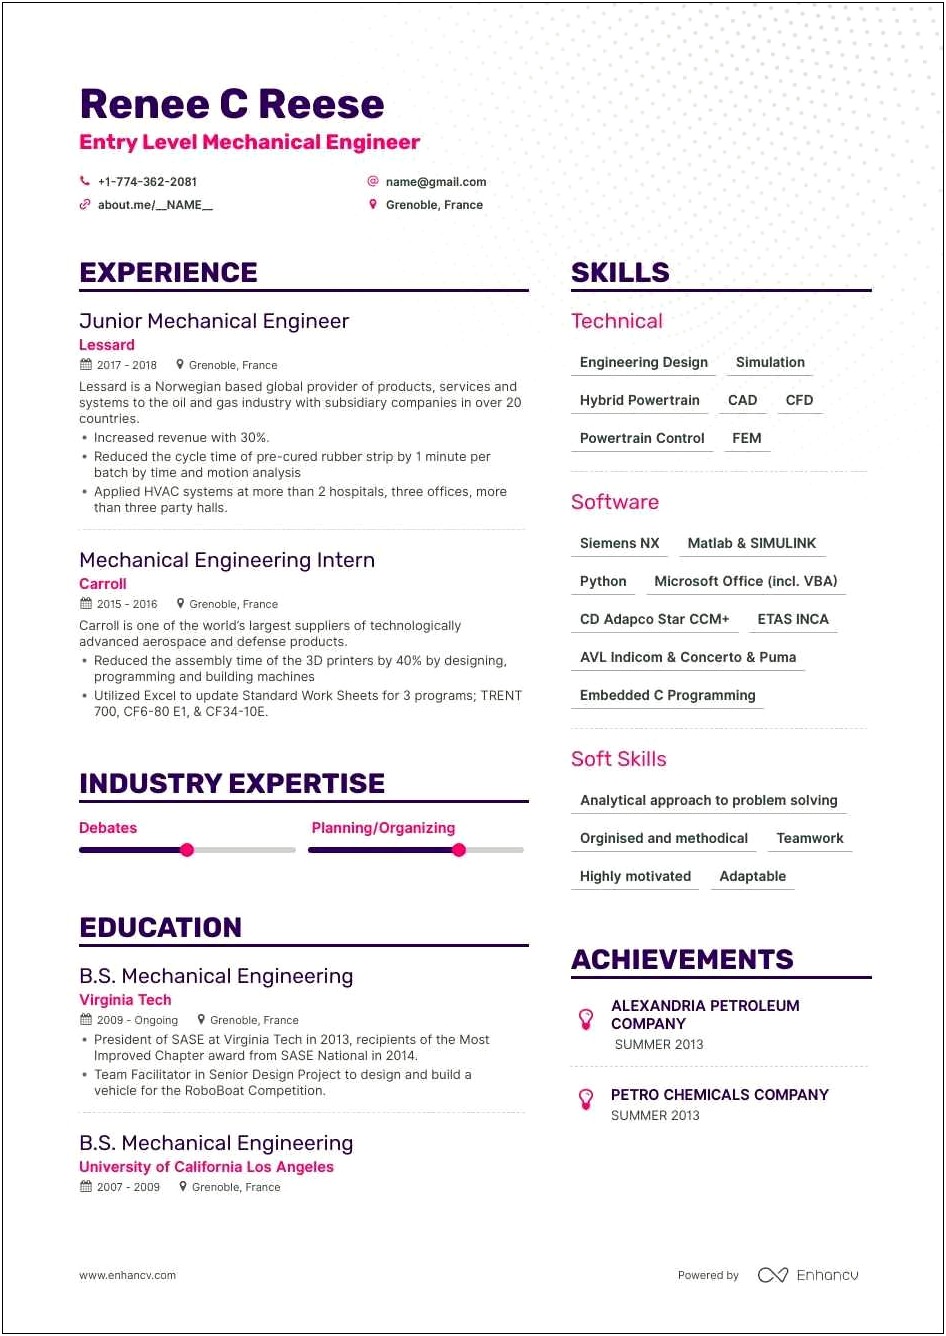 Project Engineer Resume Objective Statement